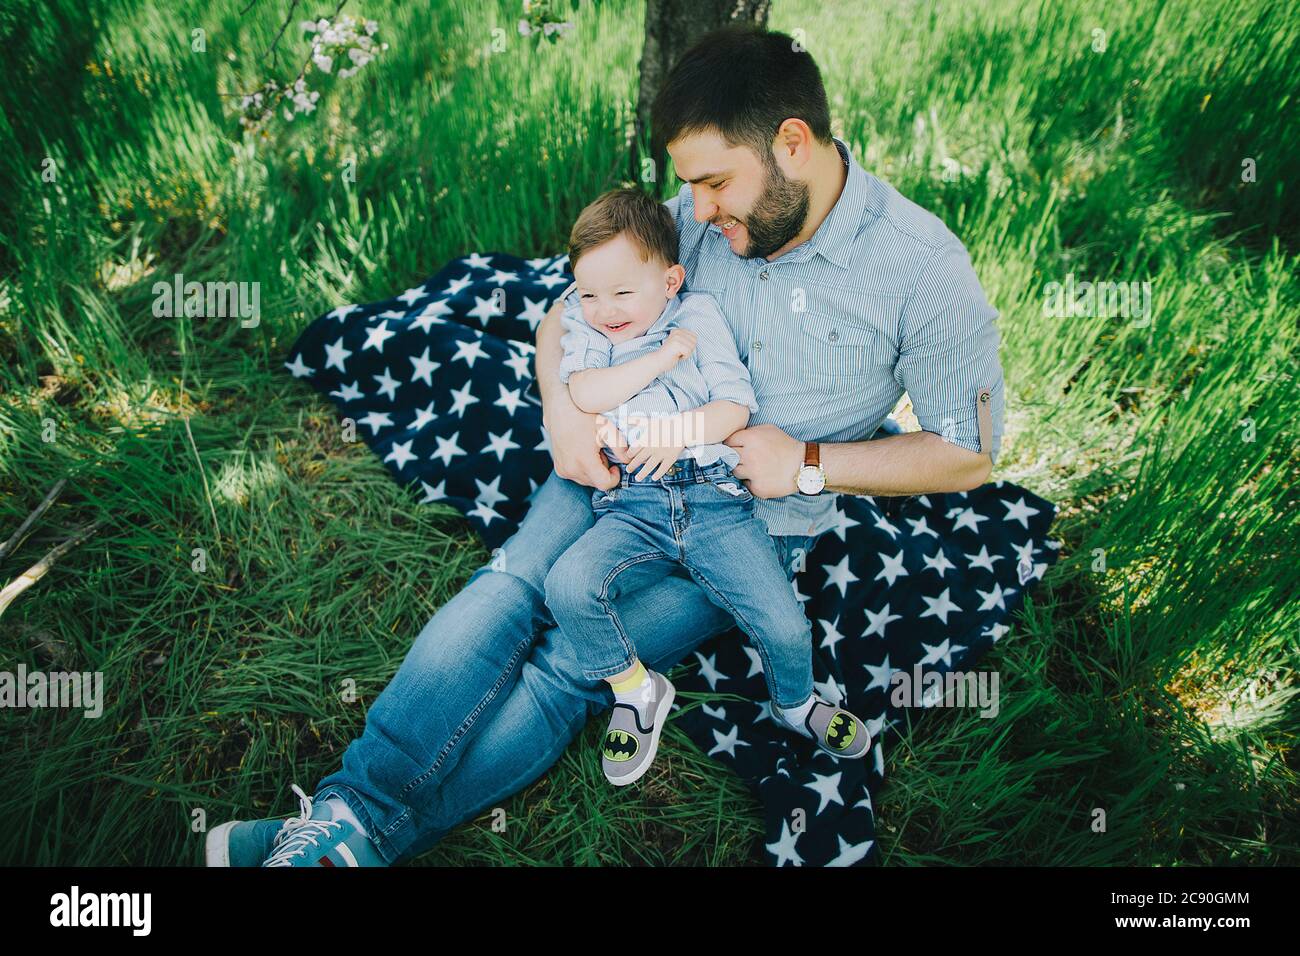 Father with son (2-3) on picnic blanket Stock Photo